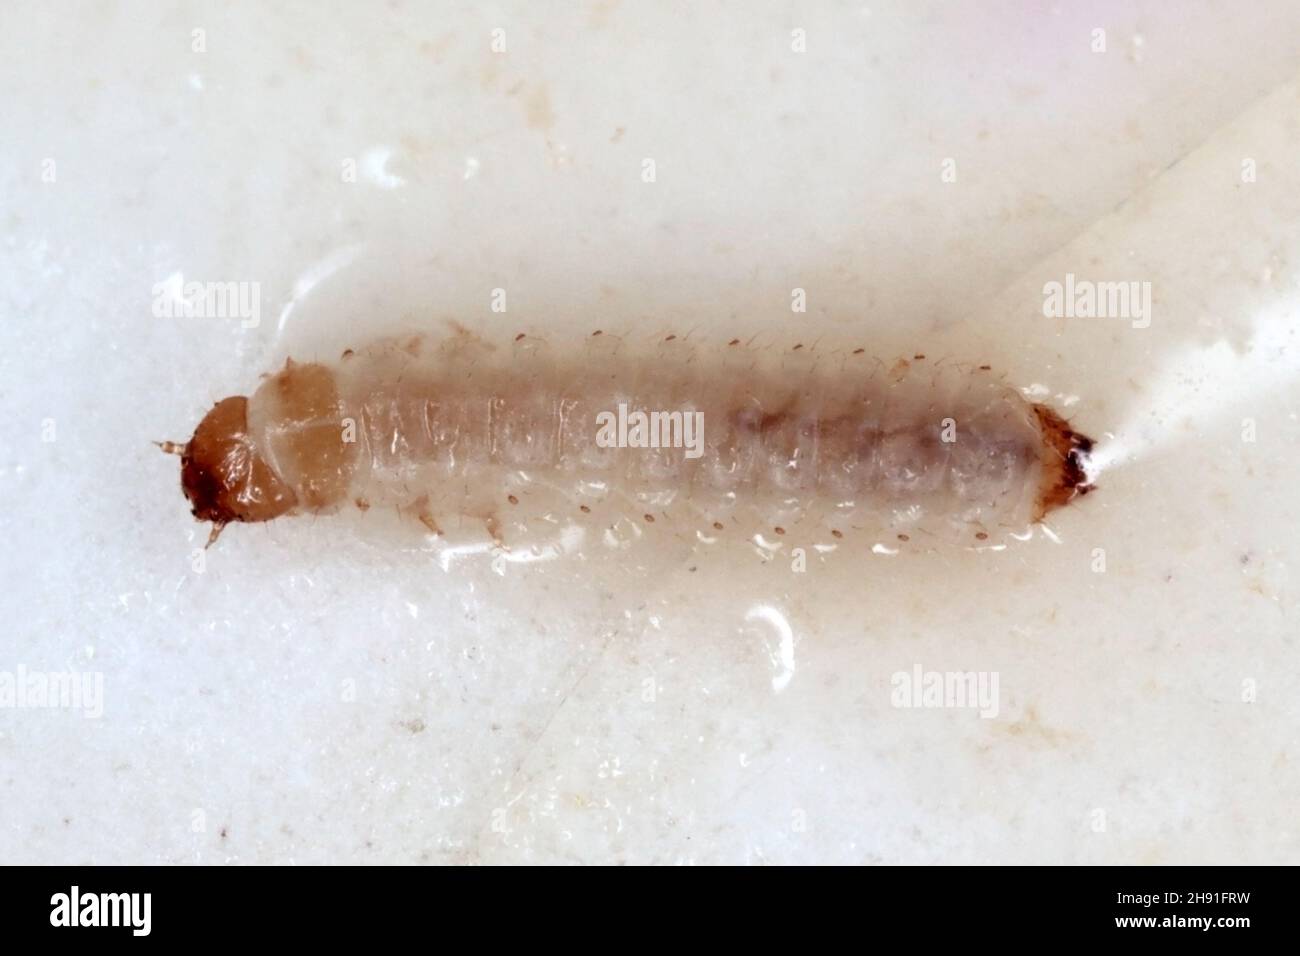 Larva of Carpophilus hemipterus (dried fruit beetle) is a species of sap-feeding beetle in the family Nitidulidae. It is a pest of ripe and dried frui Stock Photo